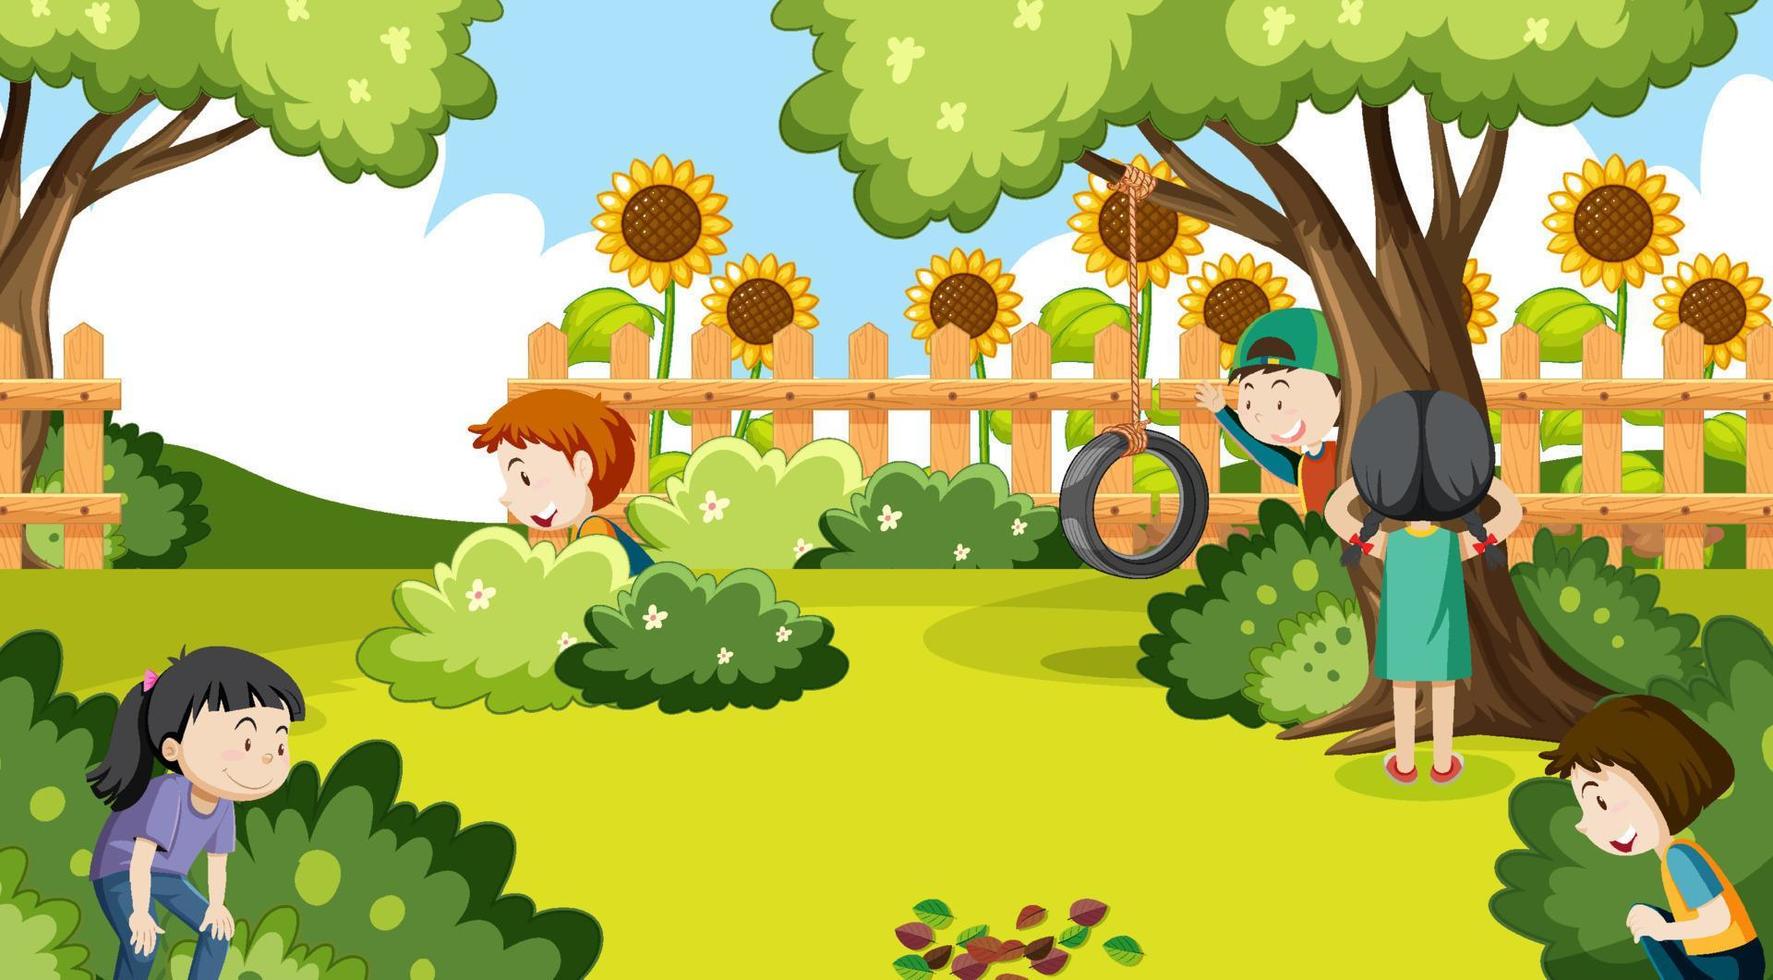 Children playing hide and seek at the park vector